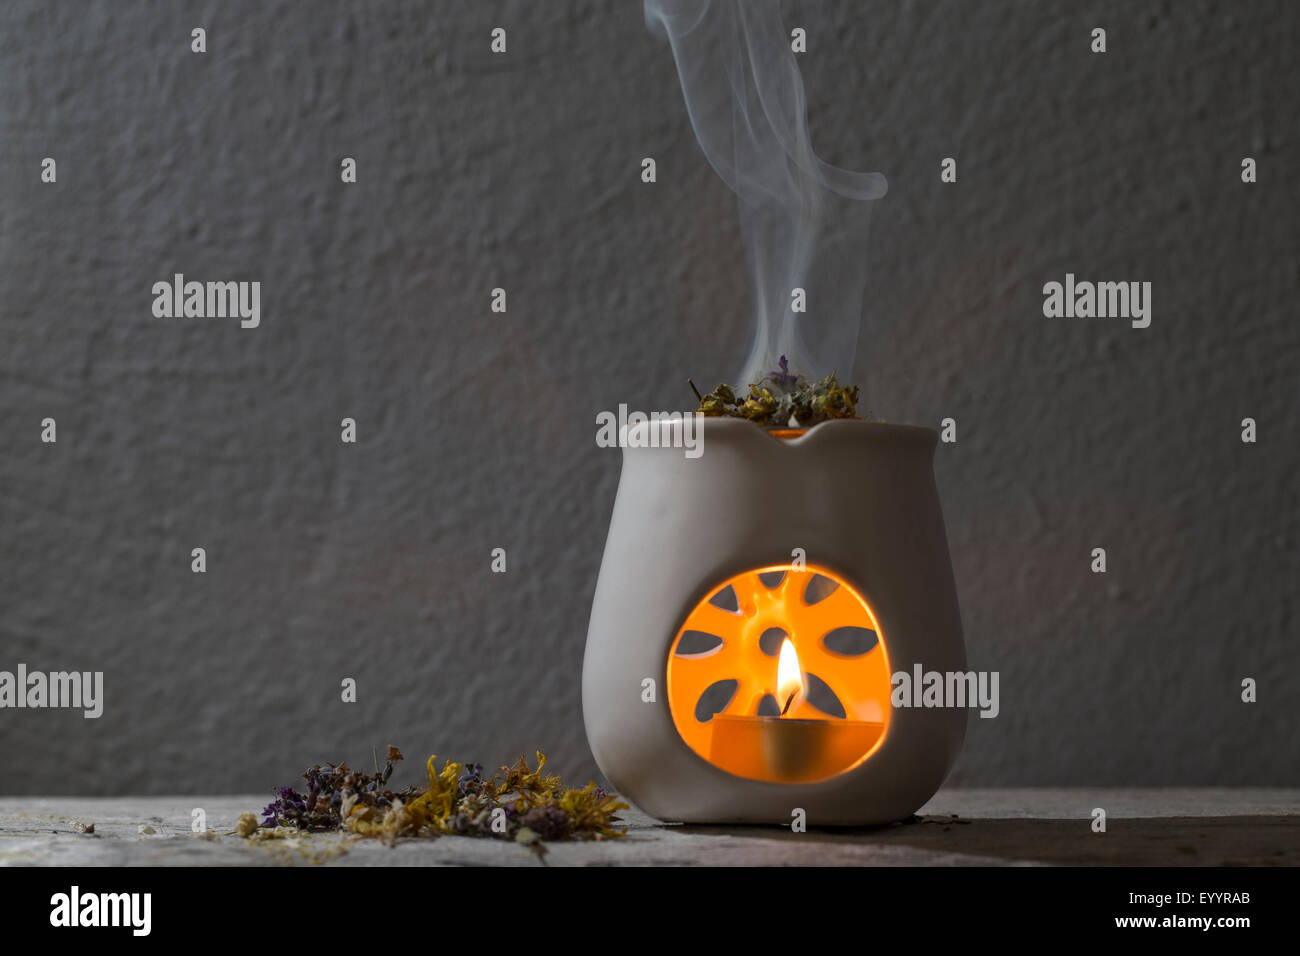 burning incense with herbs, aroma lamp Stock Photo